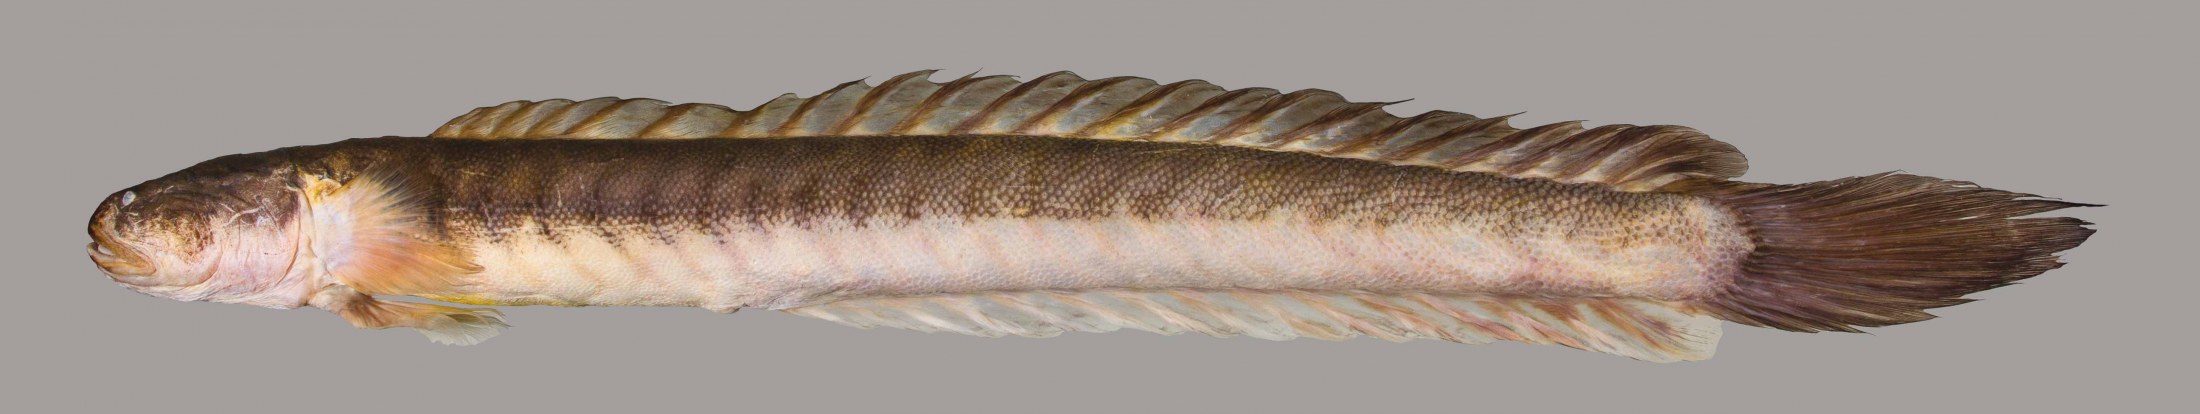 Lateral view of a violet goby